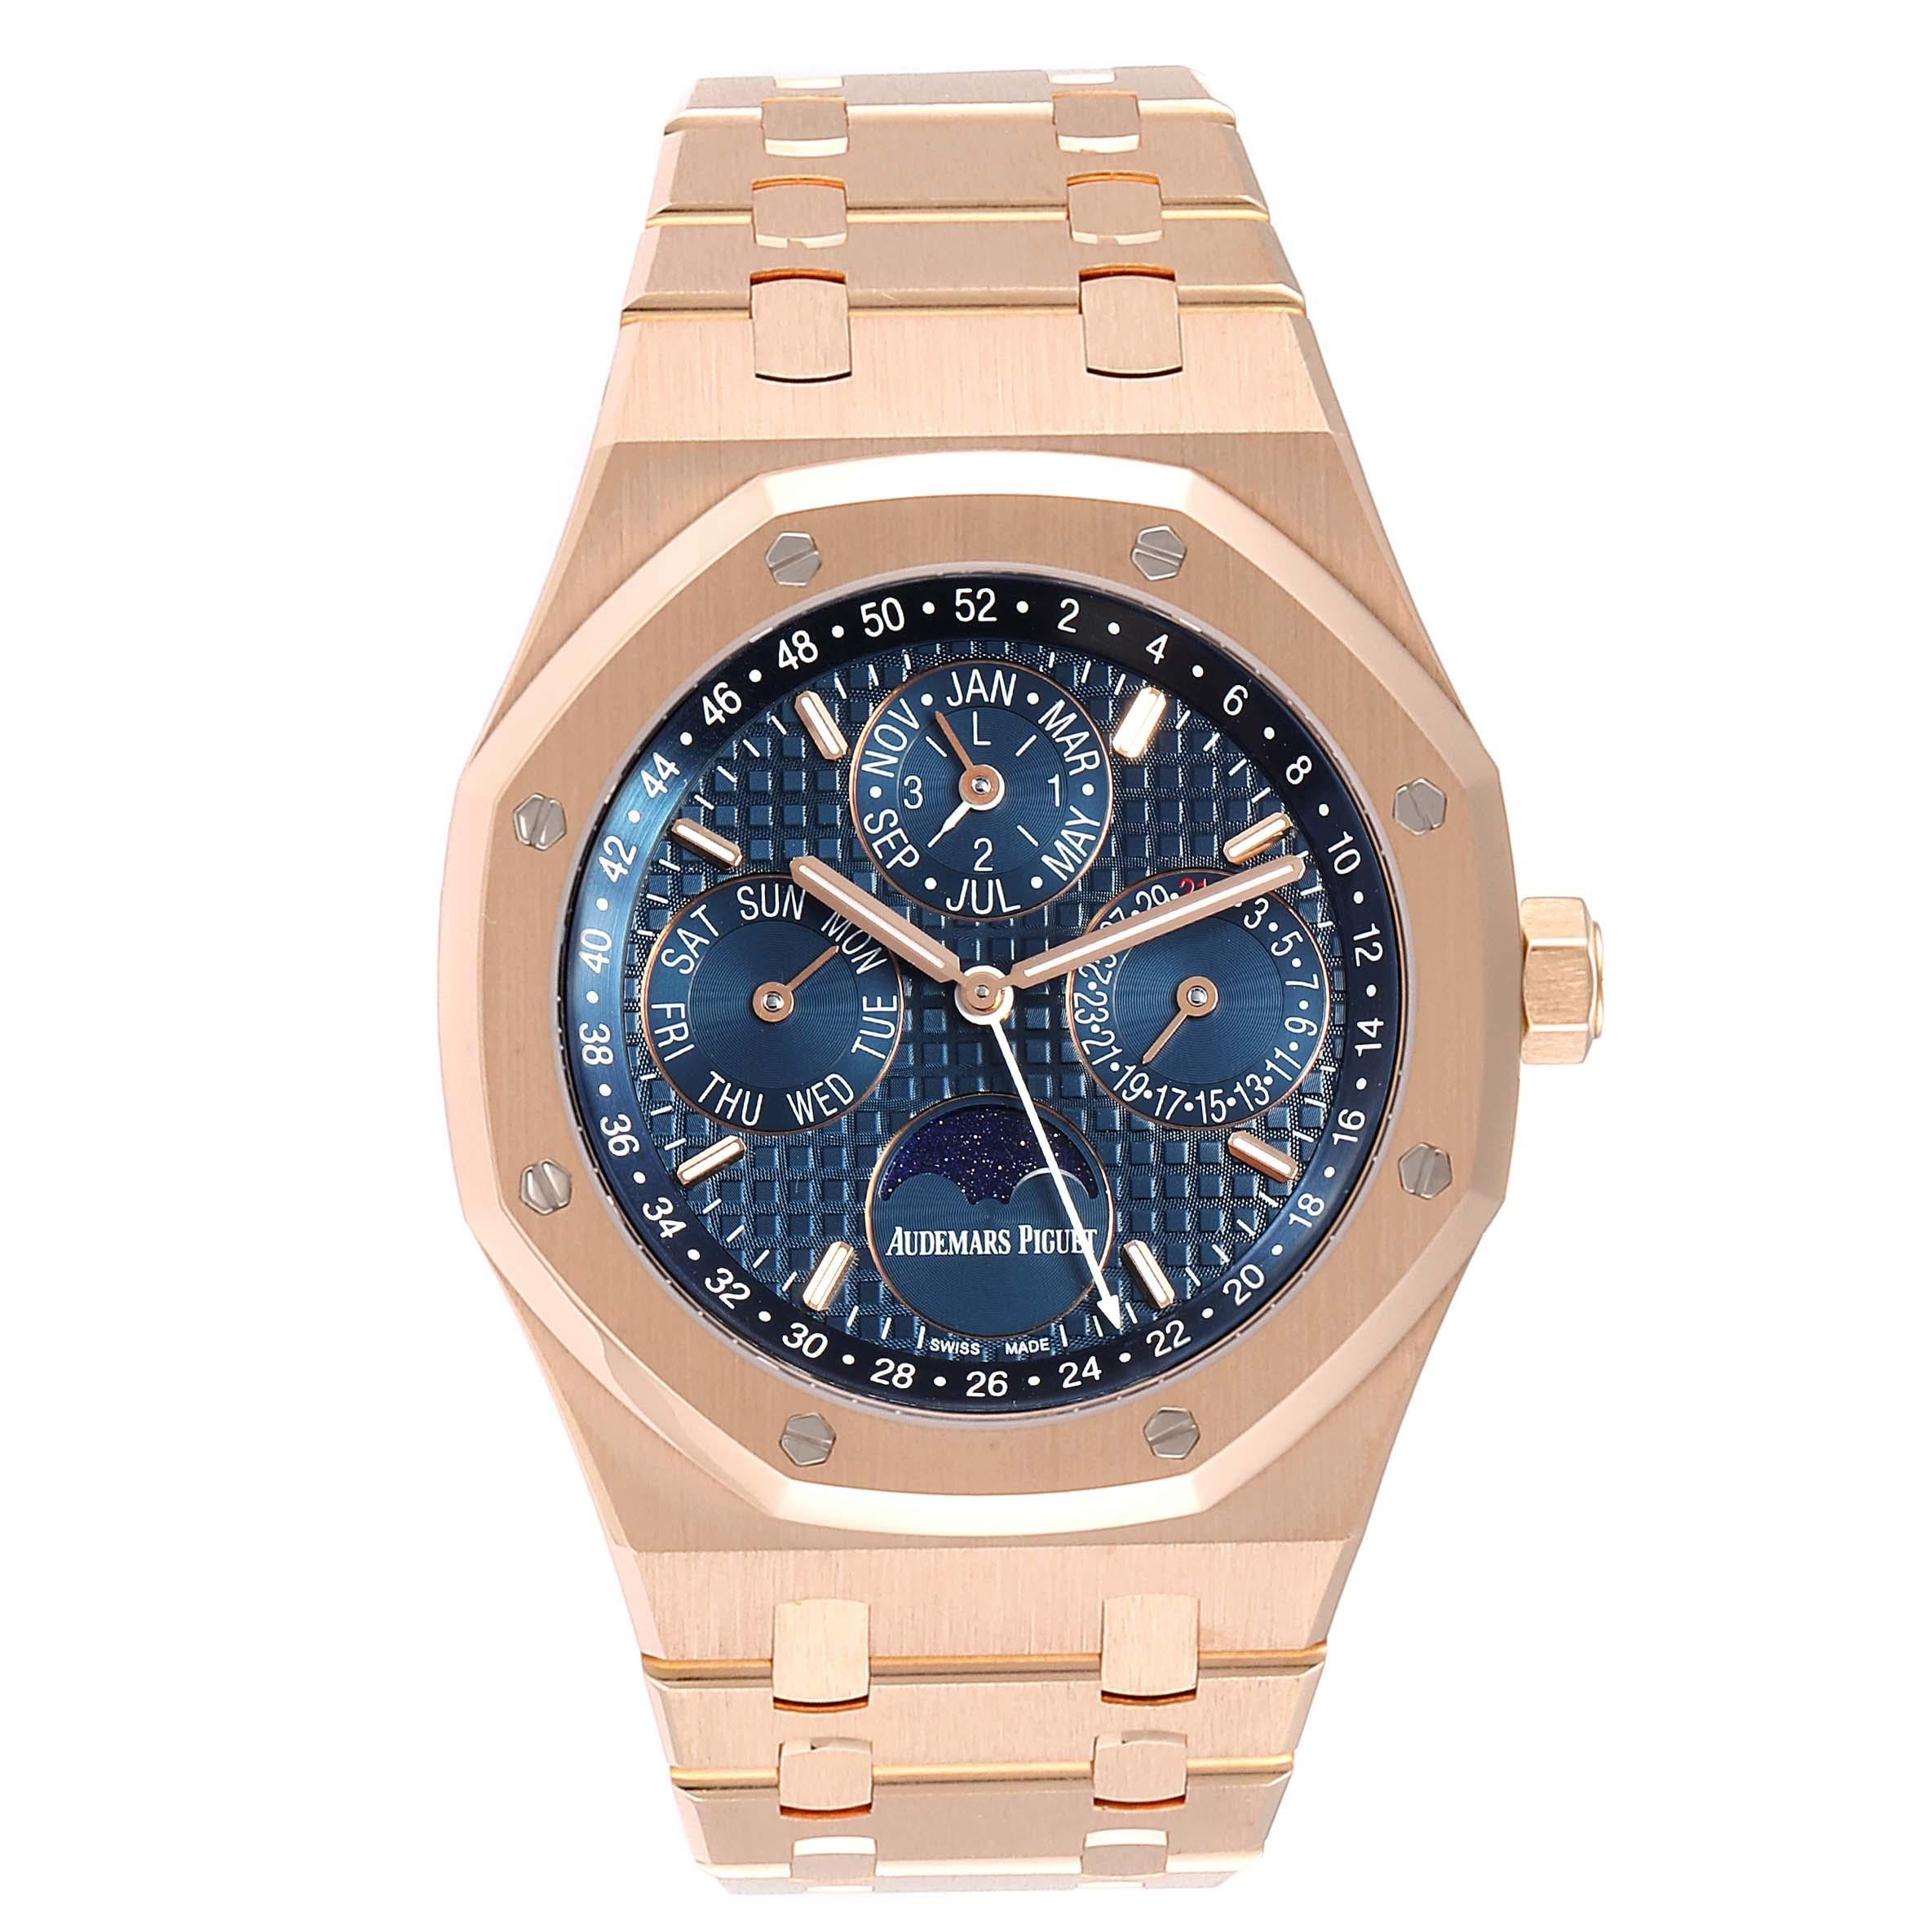 Audemars Piguet Royal Oak Perpetual Calendar Blue Dial Rose Gold Watch 26574OR. Automatic self-winding movement. Perpetual calendar. Calibre 5134 , based upon Audemars Piguet 2120, containing 38 Jewels, composed of 374 parts, bitting at 19800 vph,